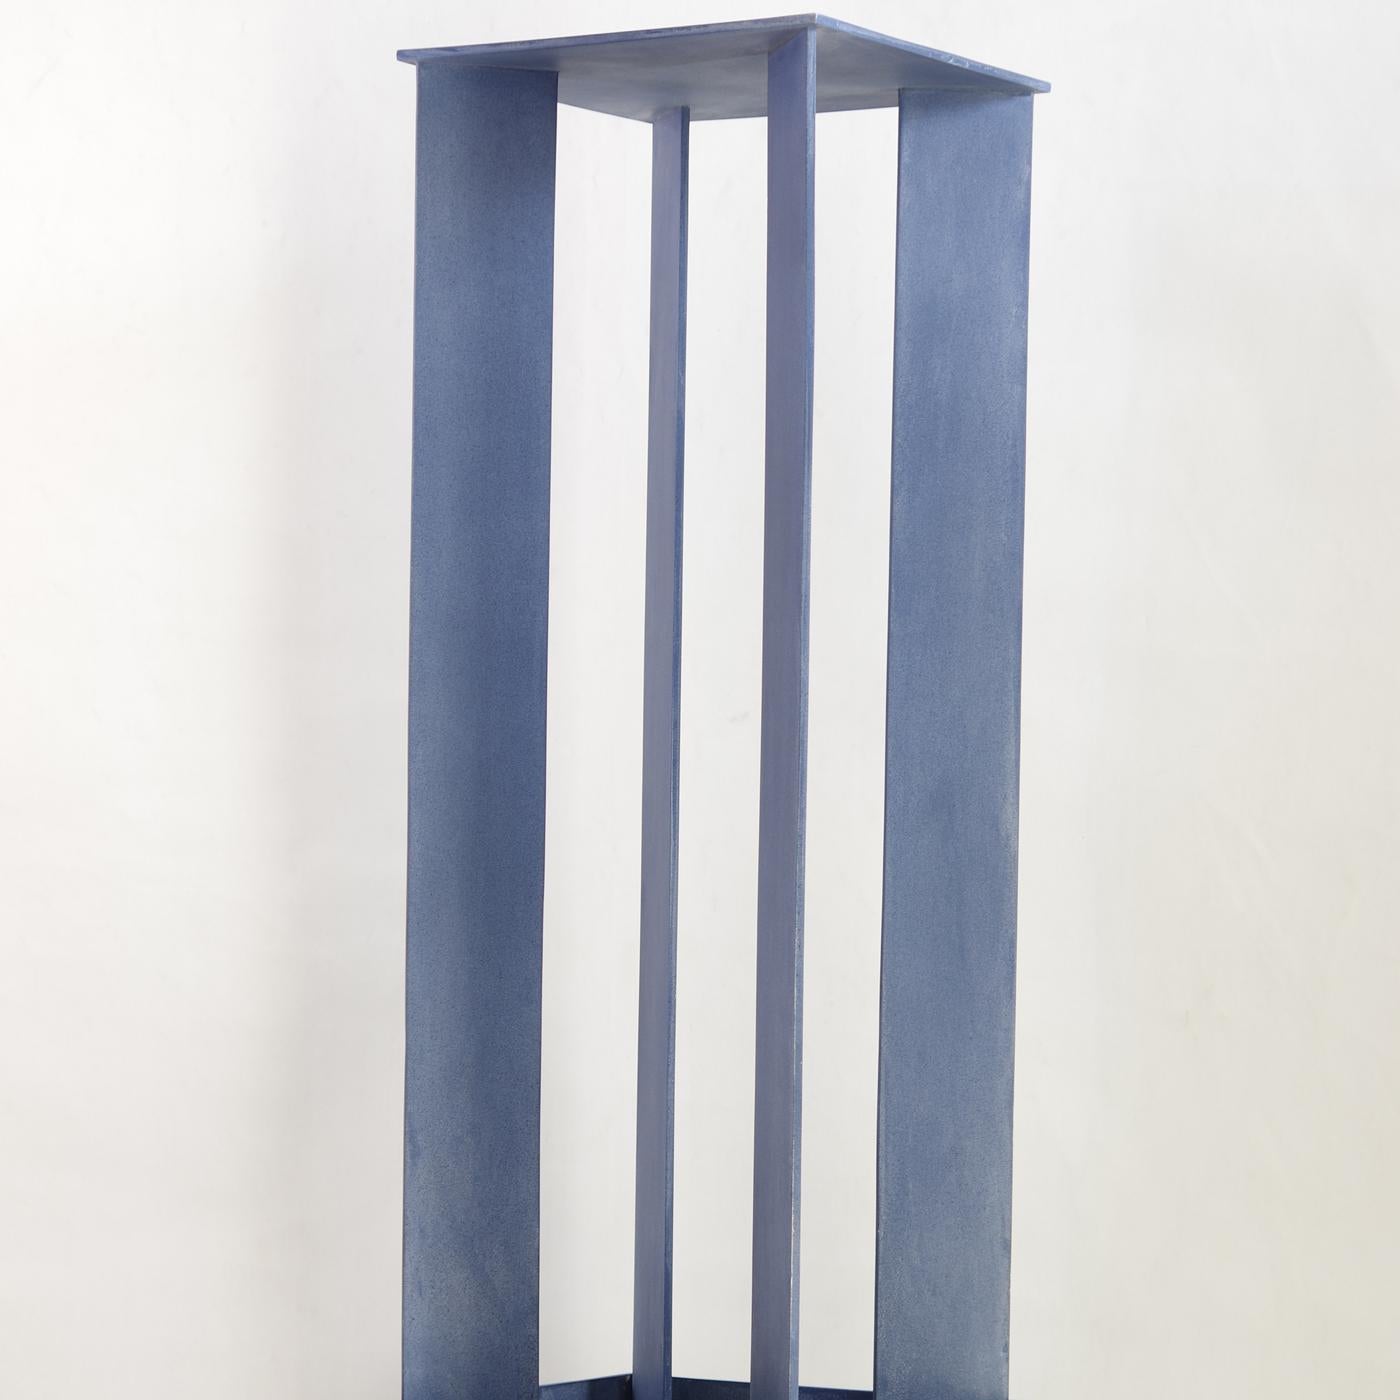 A tribute to Giorgio De Chirico, this iron sculpture is part of the Torri series (towers in English) and features a sturdy square base supporting an intriguing upright construction. The structure has four flat panels in the corners of the base